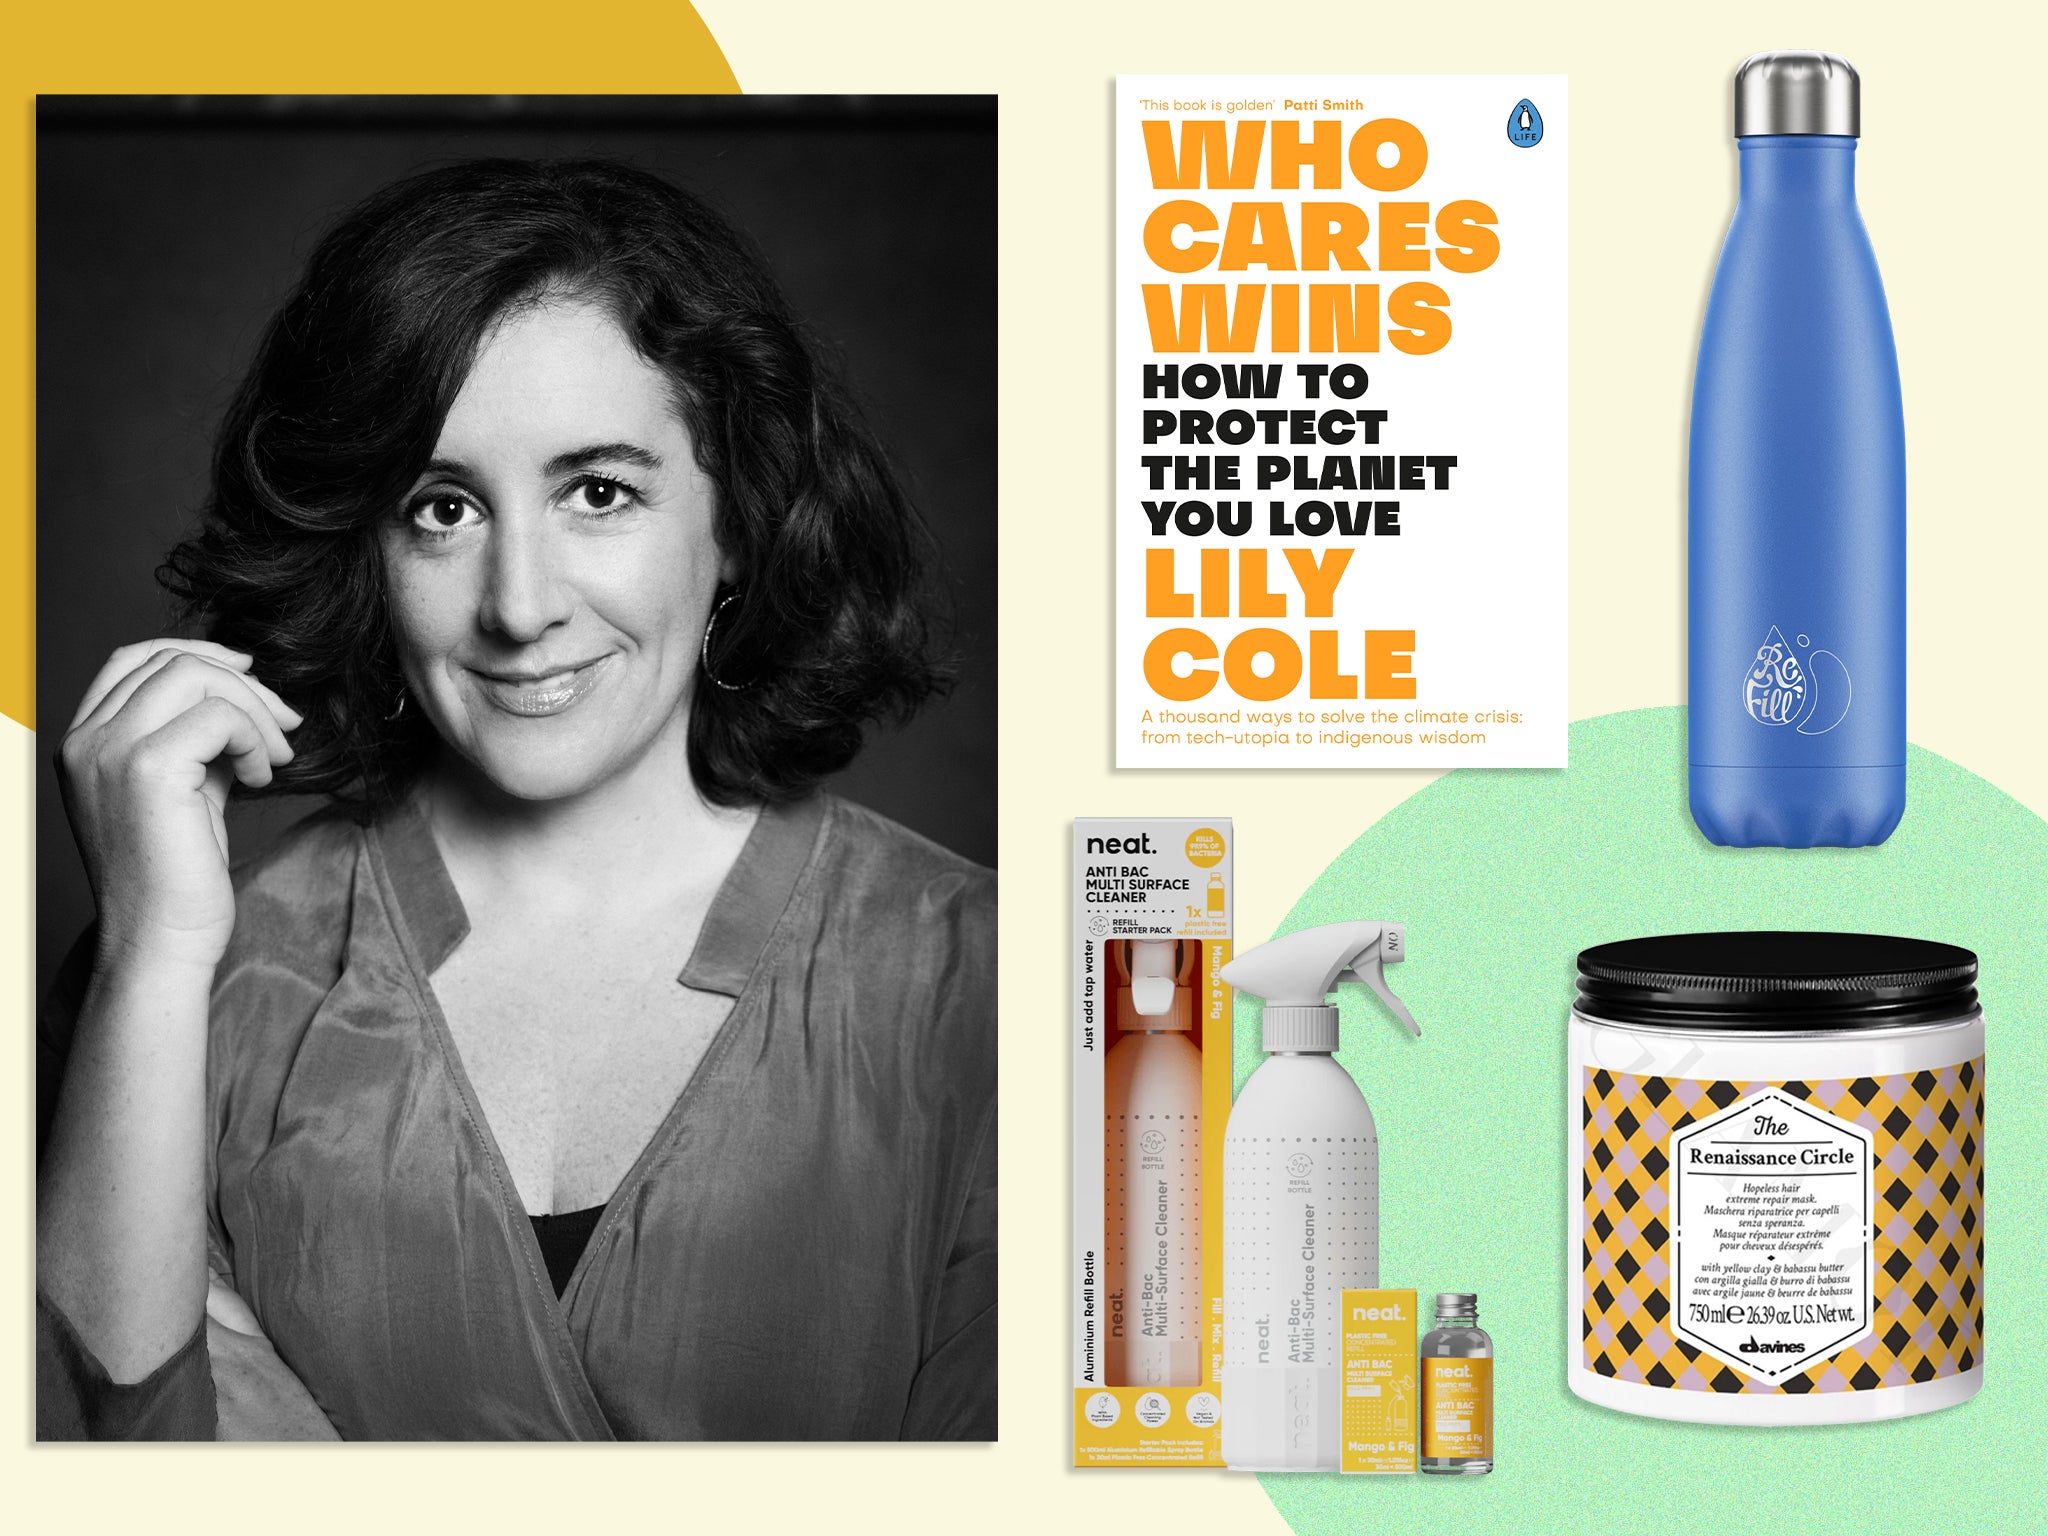 Consider this your guide to a more eco-friendly life thanks to the woman who knows best